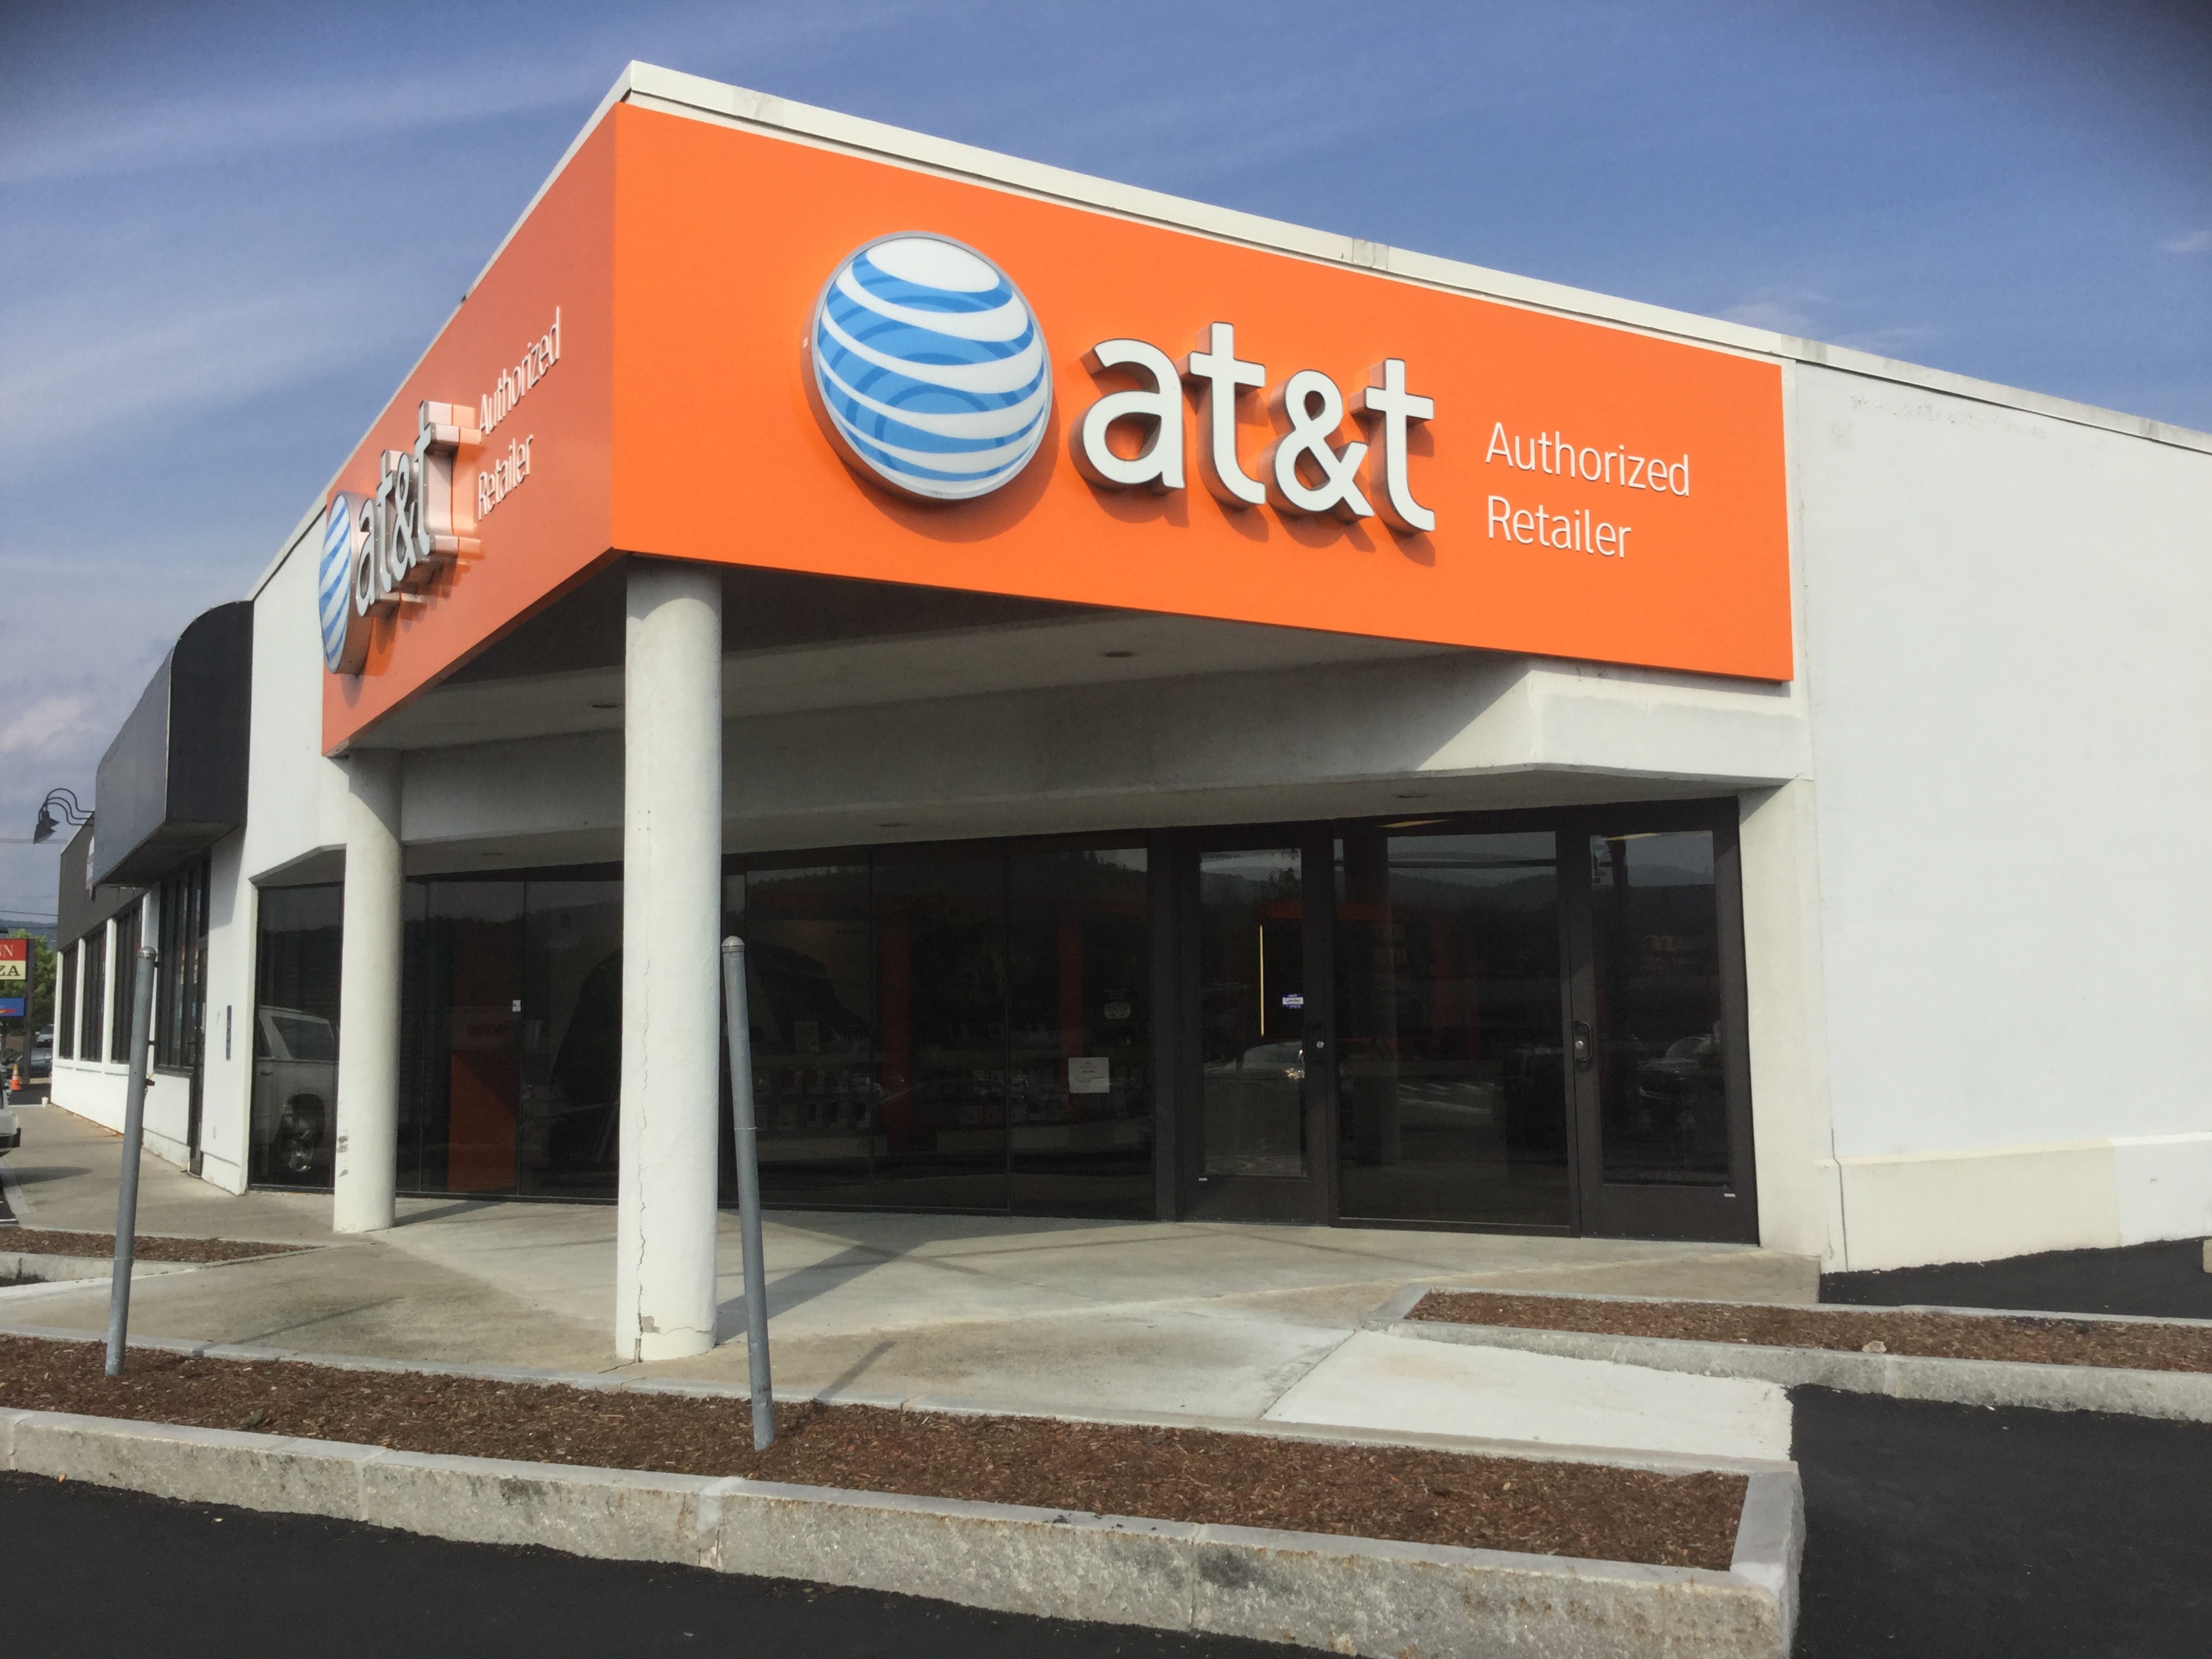 AT&T Store Coupons near me in West Lebanon, NH 03784 ...